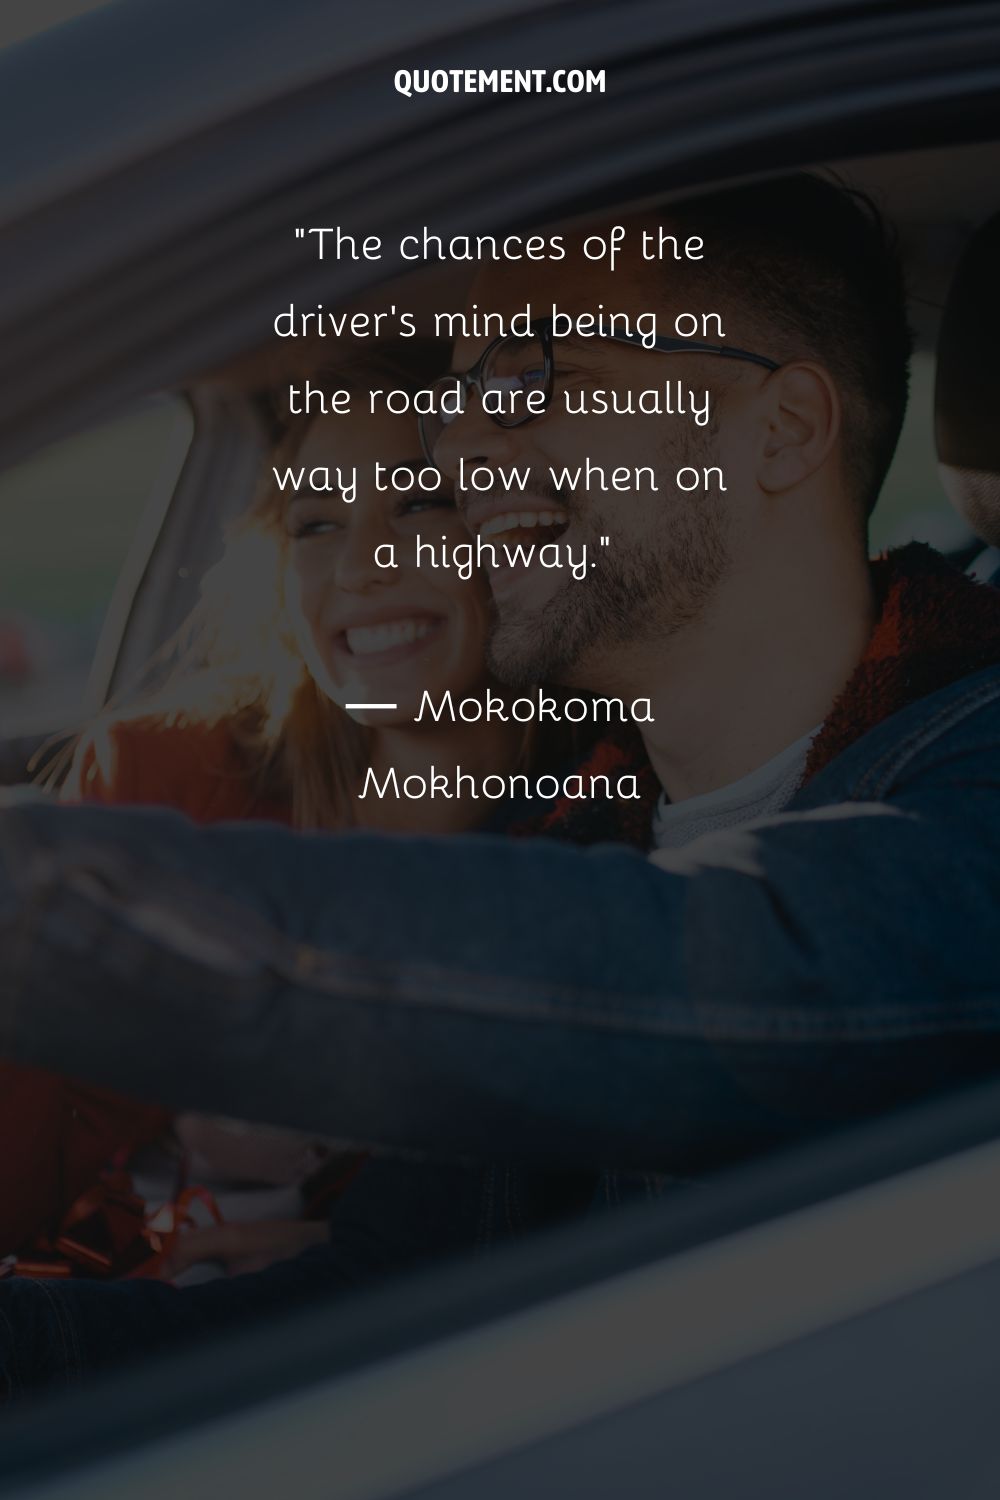 The chances of the driver’s mind being on the road are usually way too low when on a highway